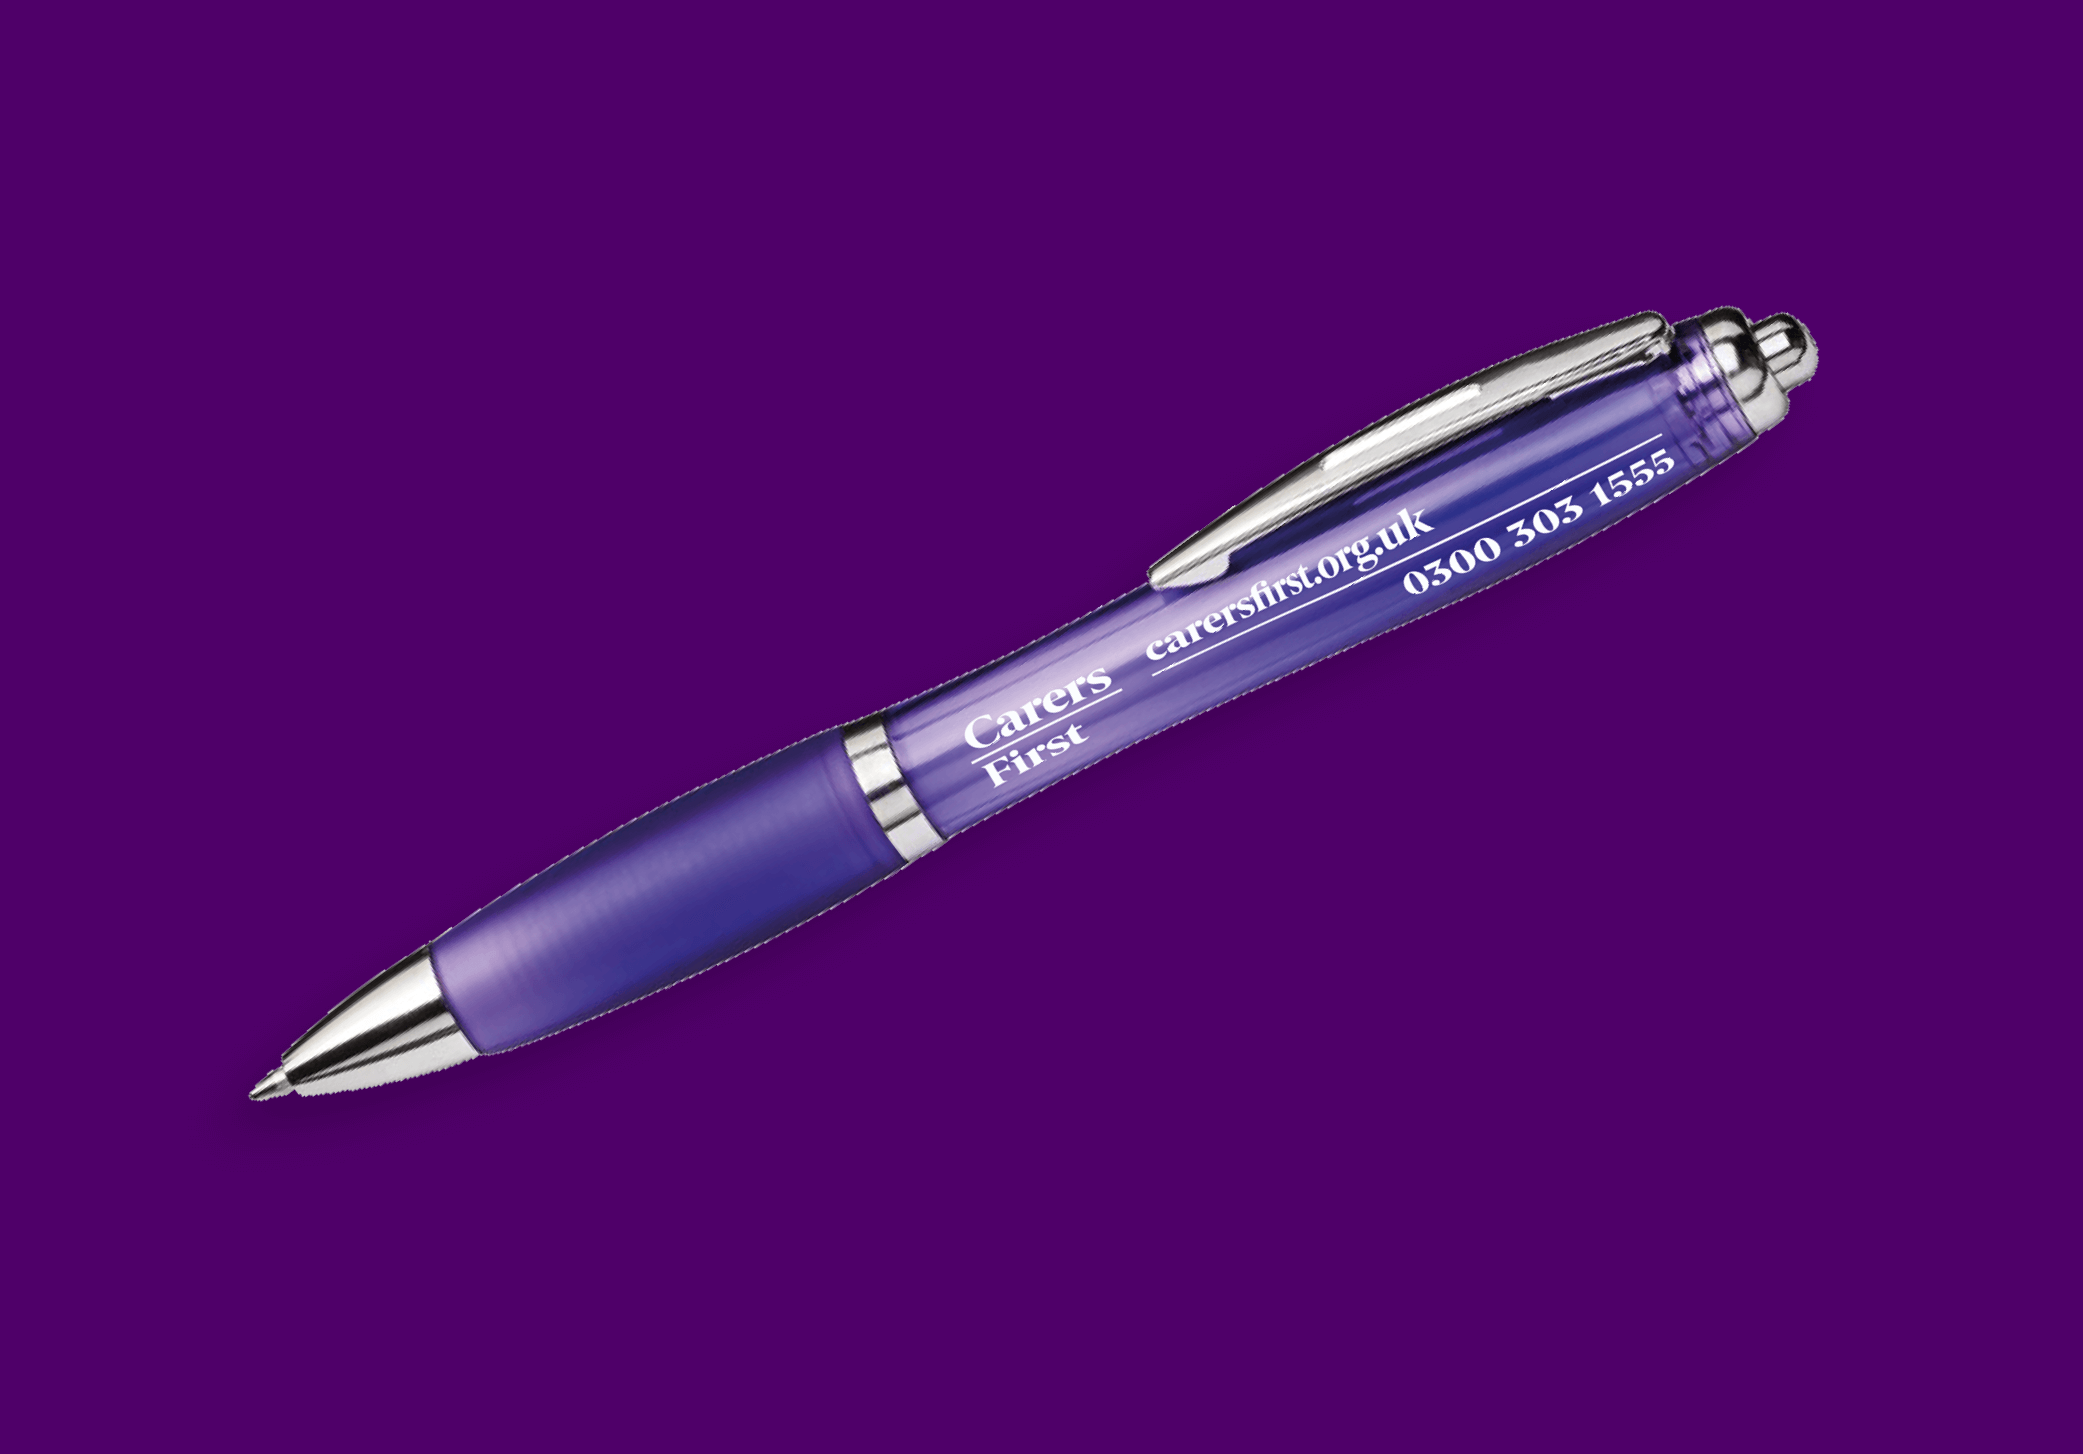 Carers first branded purple pen